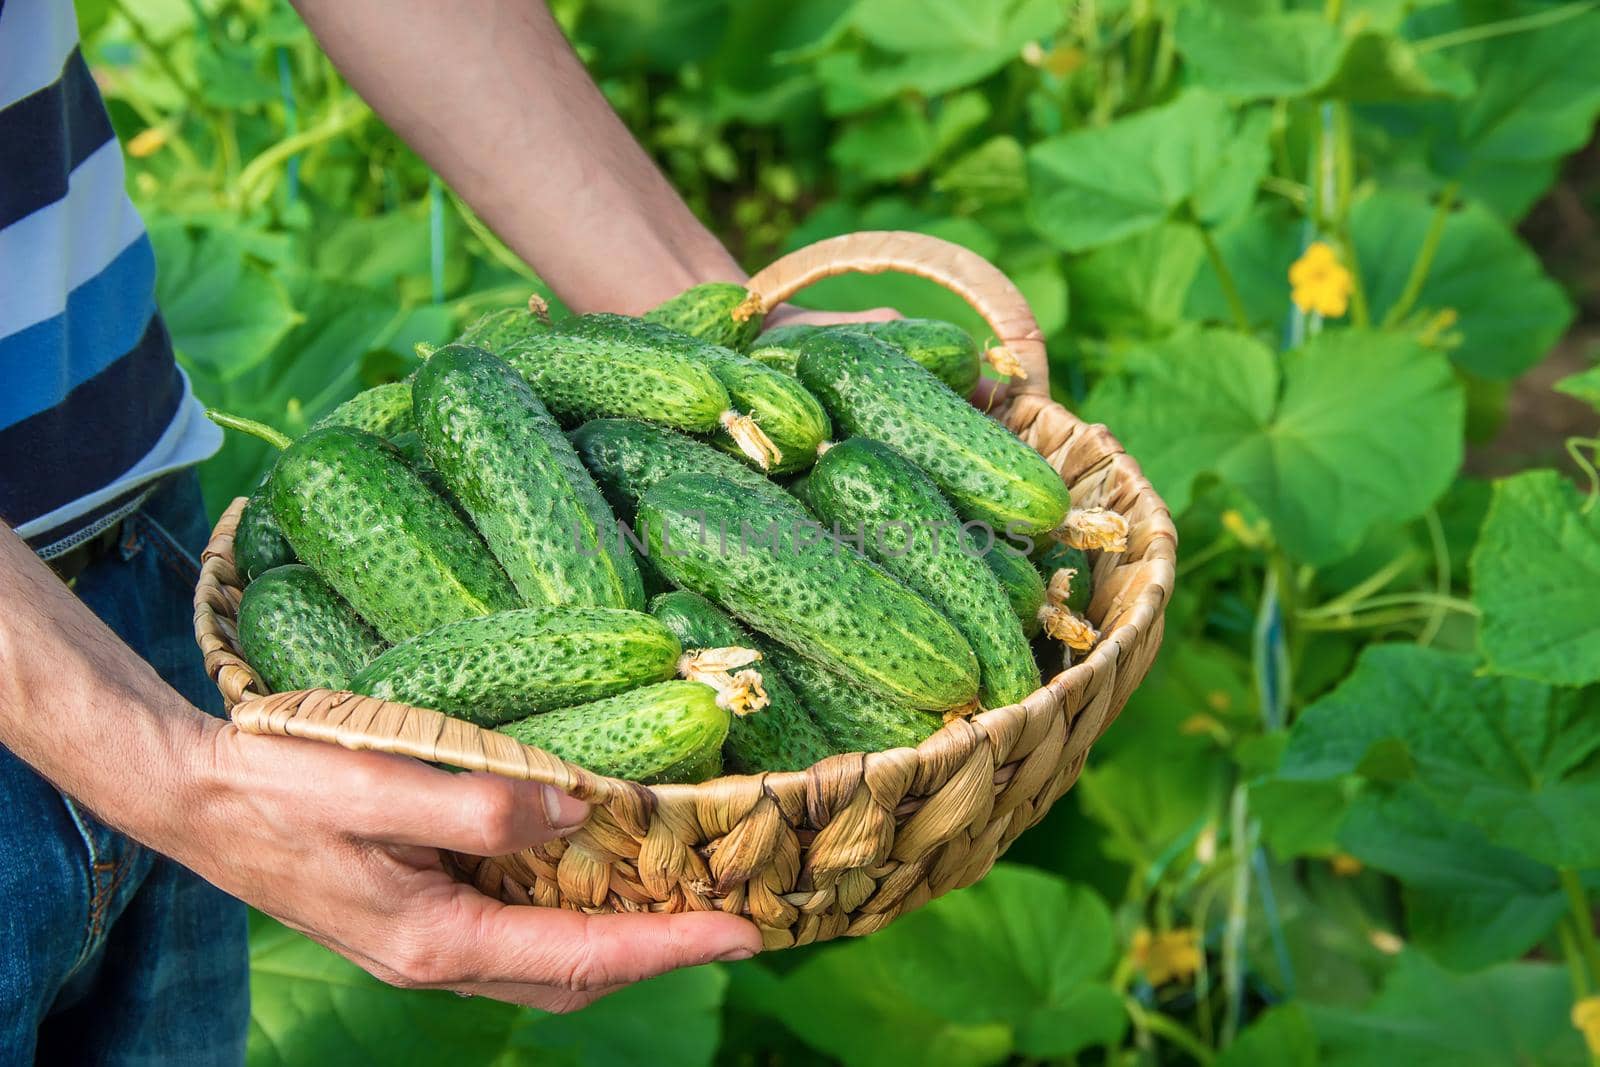 homemade cucumber cultivation and harvest in the hands of men. by yanadjana